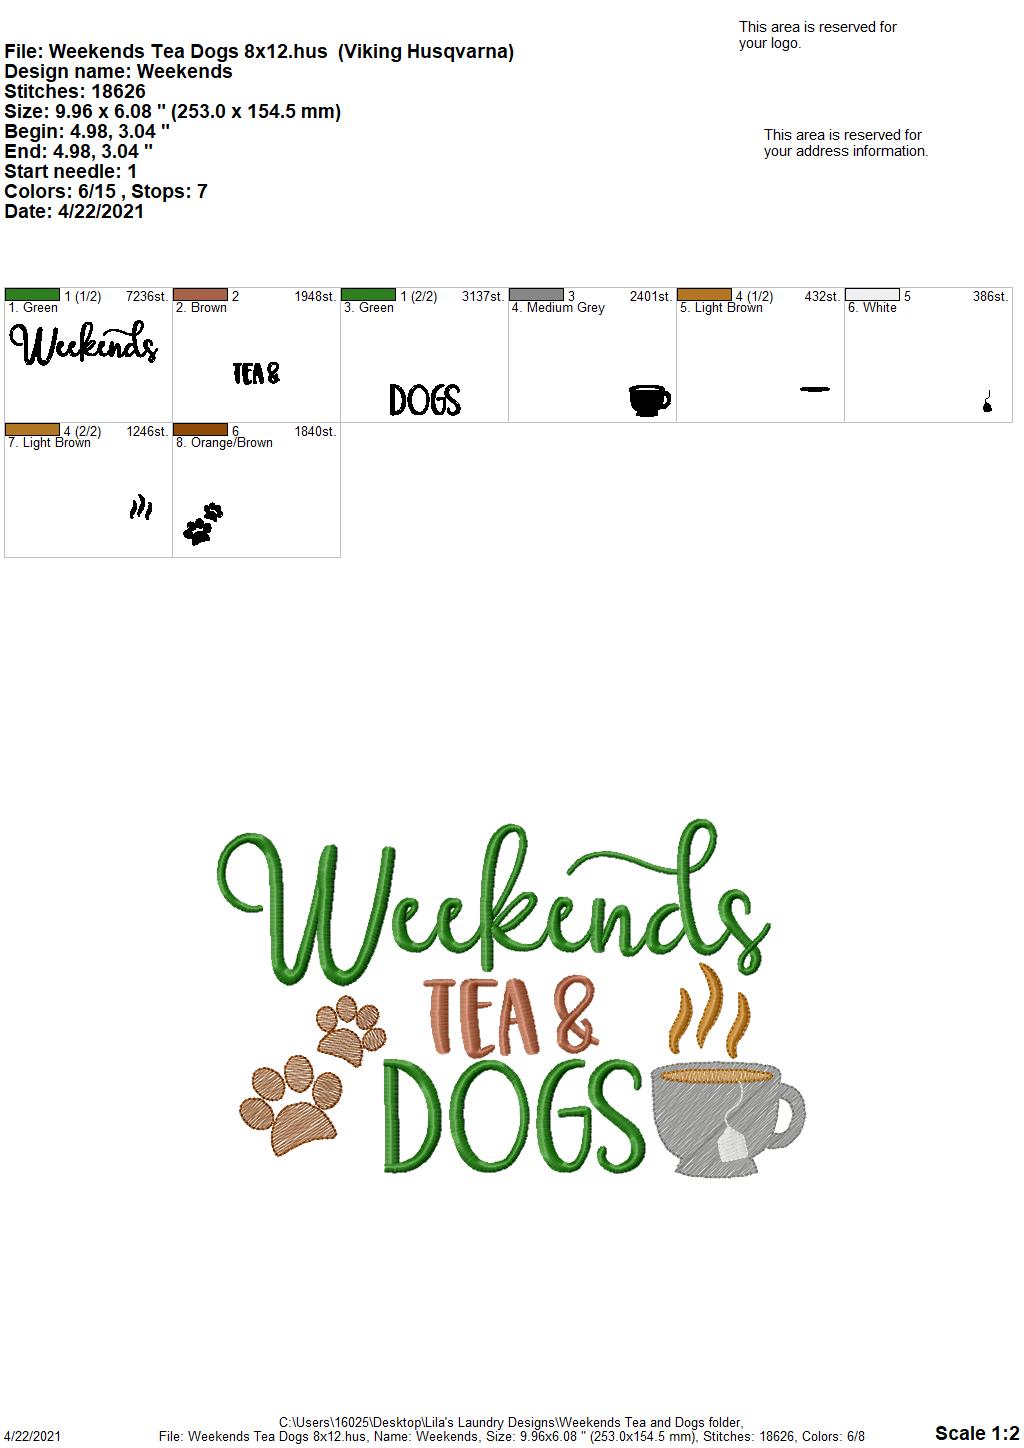 Weekends Tea Dogs - 3 sizes- Digital Embroidery Design